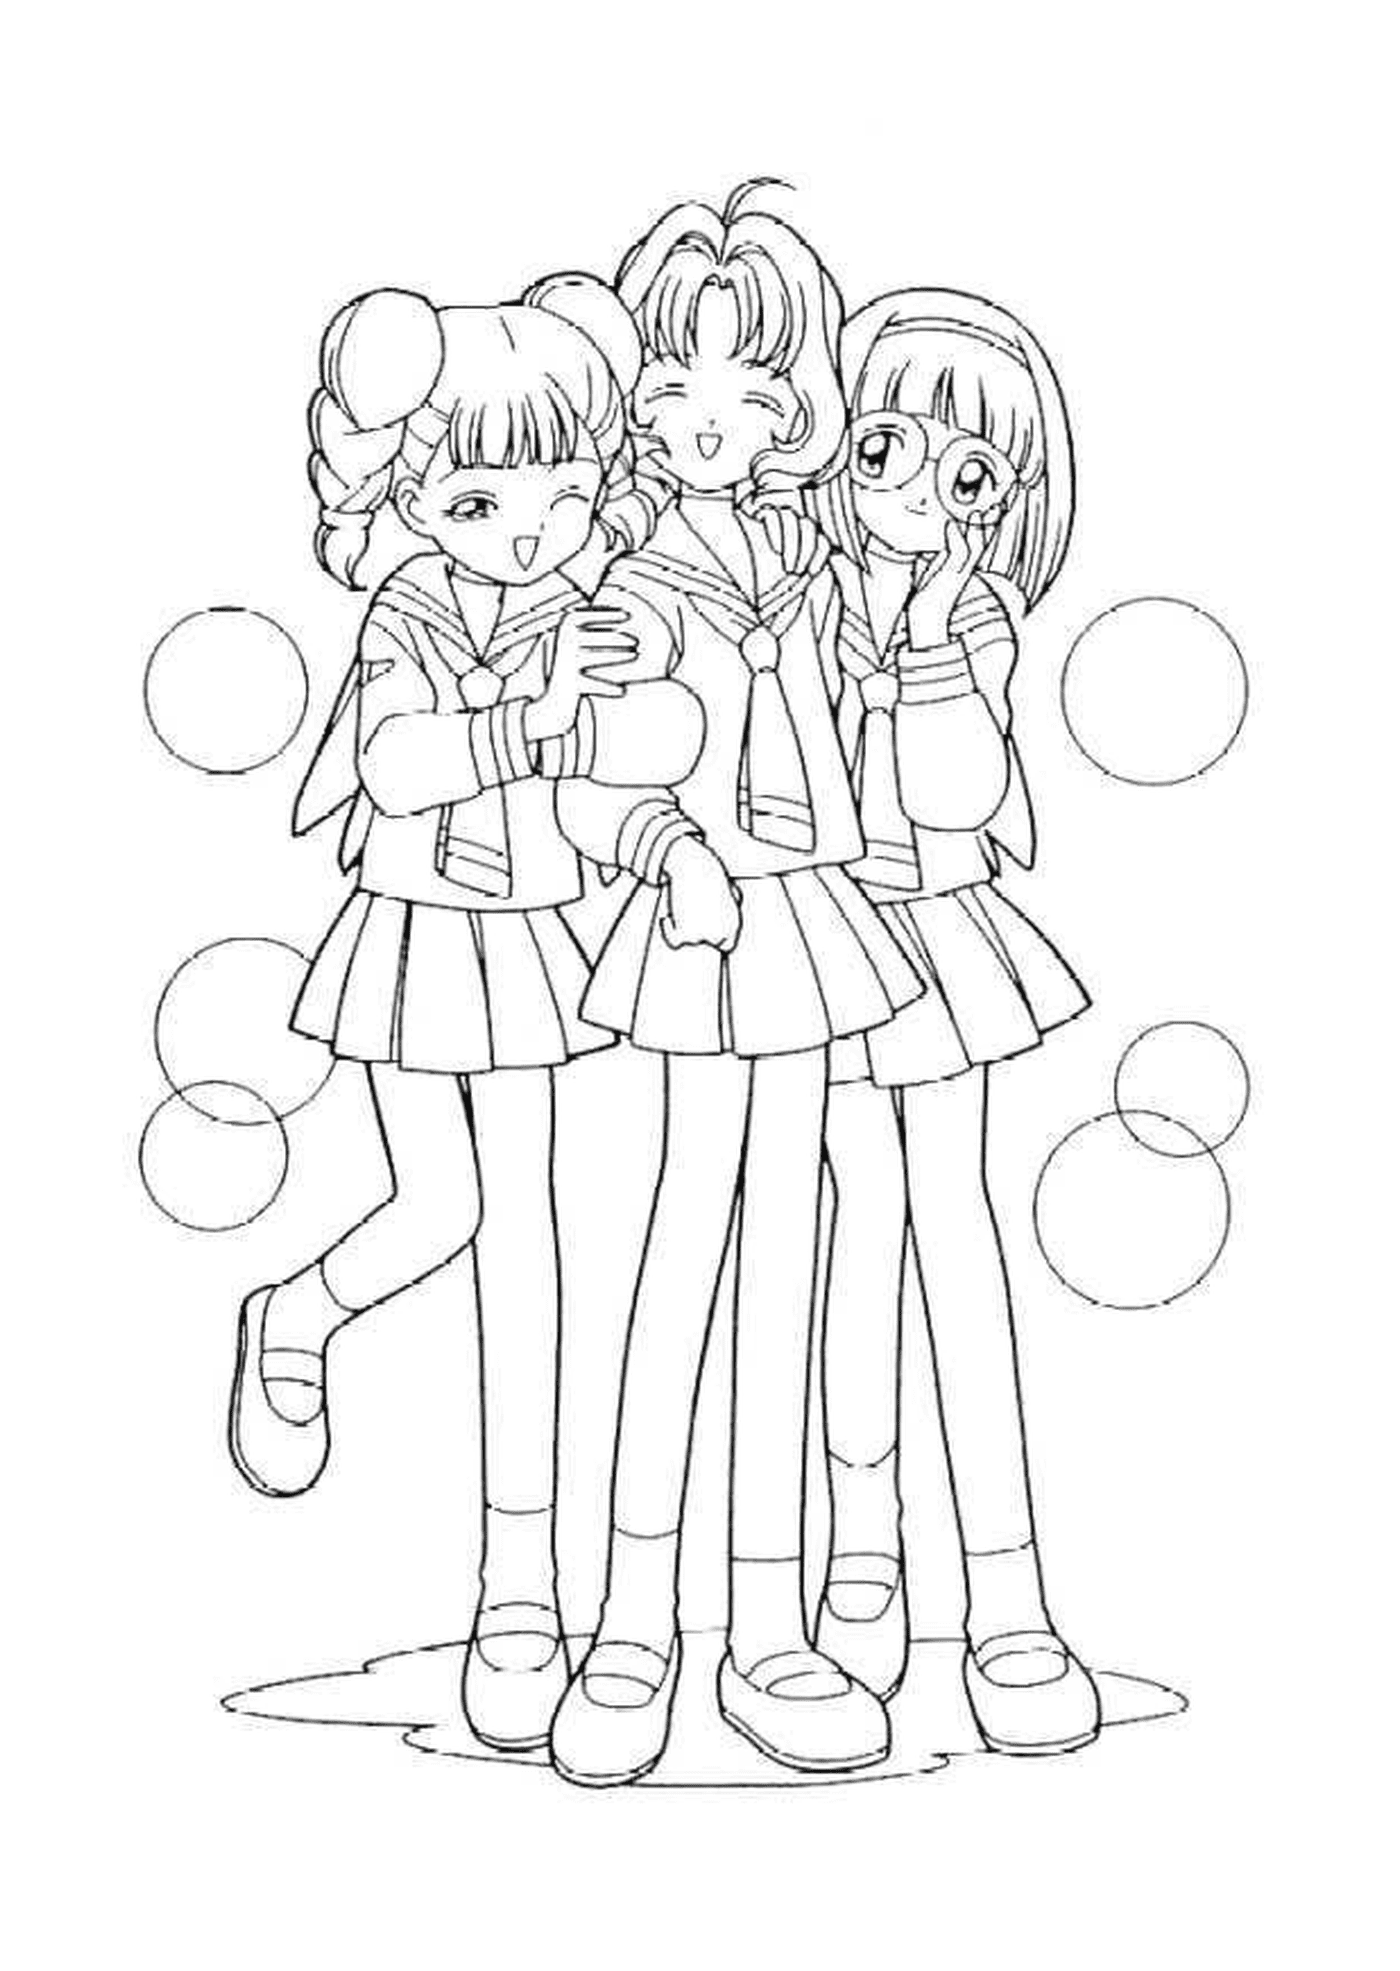  A group of three girls standing side by side 